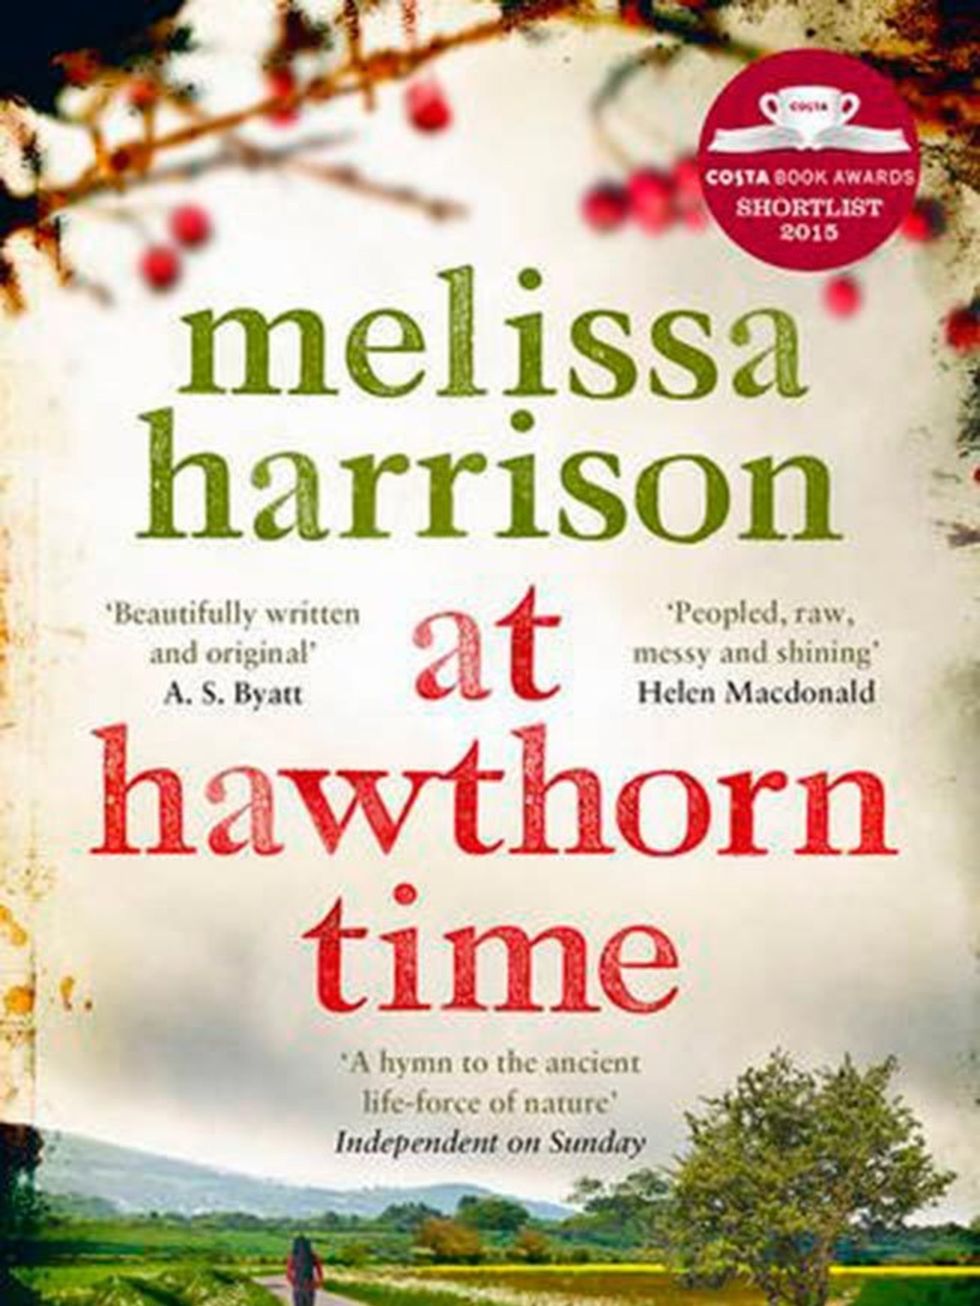 At Hawthorn Time by Melissa Harrison

Heres where it all ends: a long, straight road between fields. Four thirty on a May morning, the black fading to blue, dawn gathering somewhere below the treeline in the east. Imagine a Roman road. No, go back furth